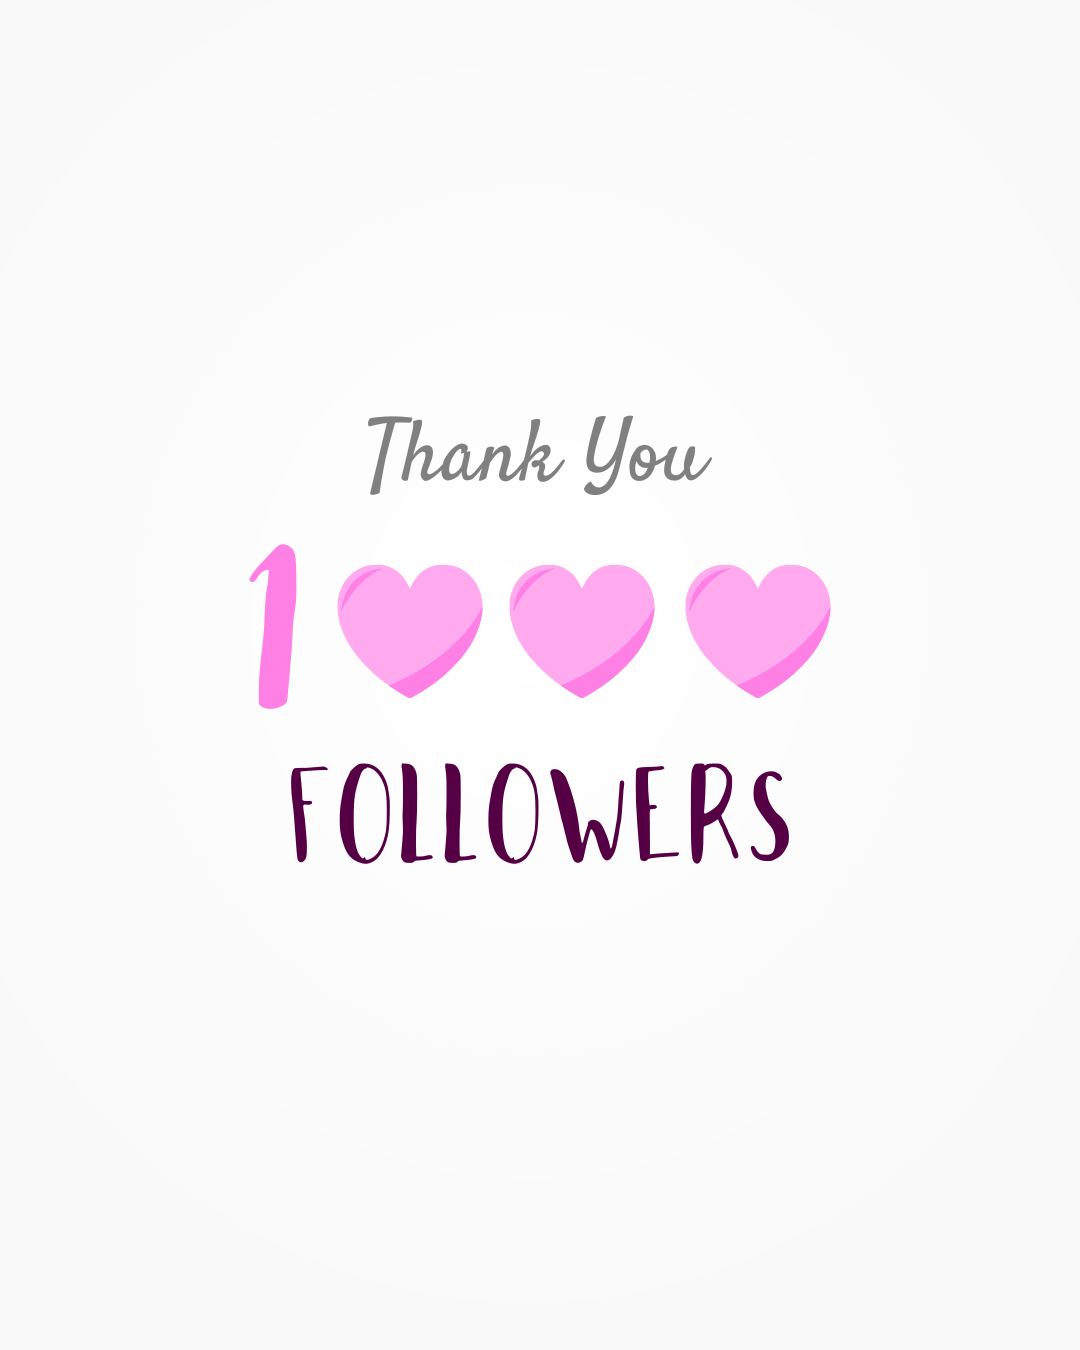 Thank you post for 100 followers followers, Get instagram followers, 1000 followers instagram